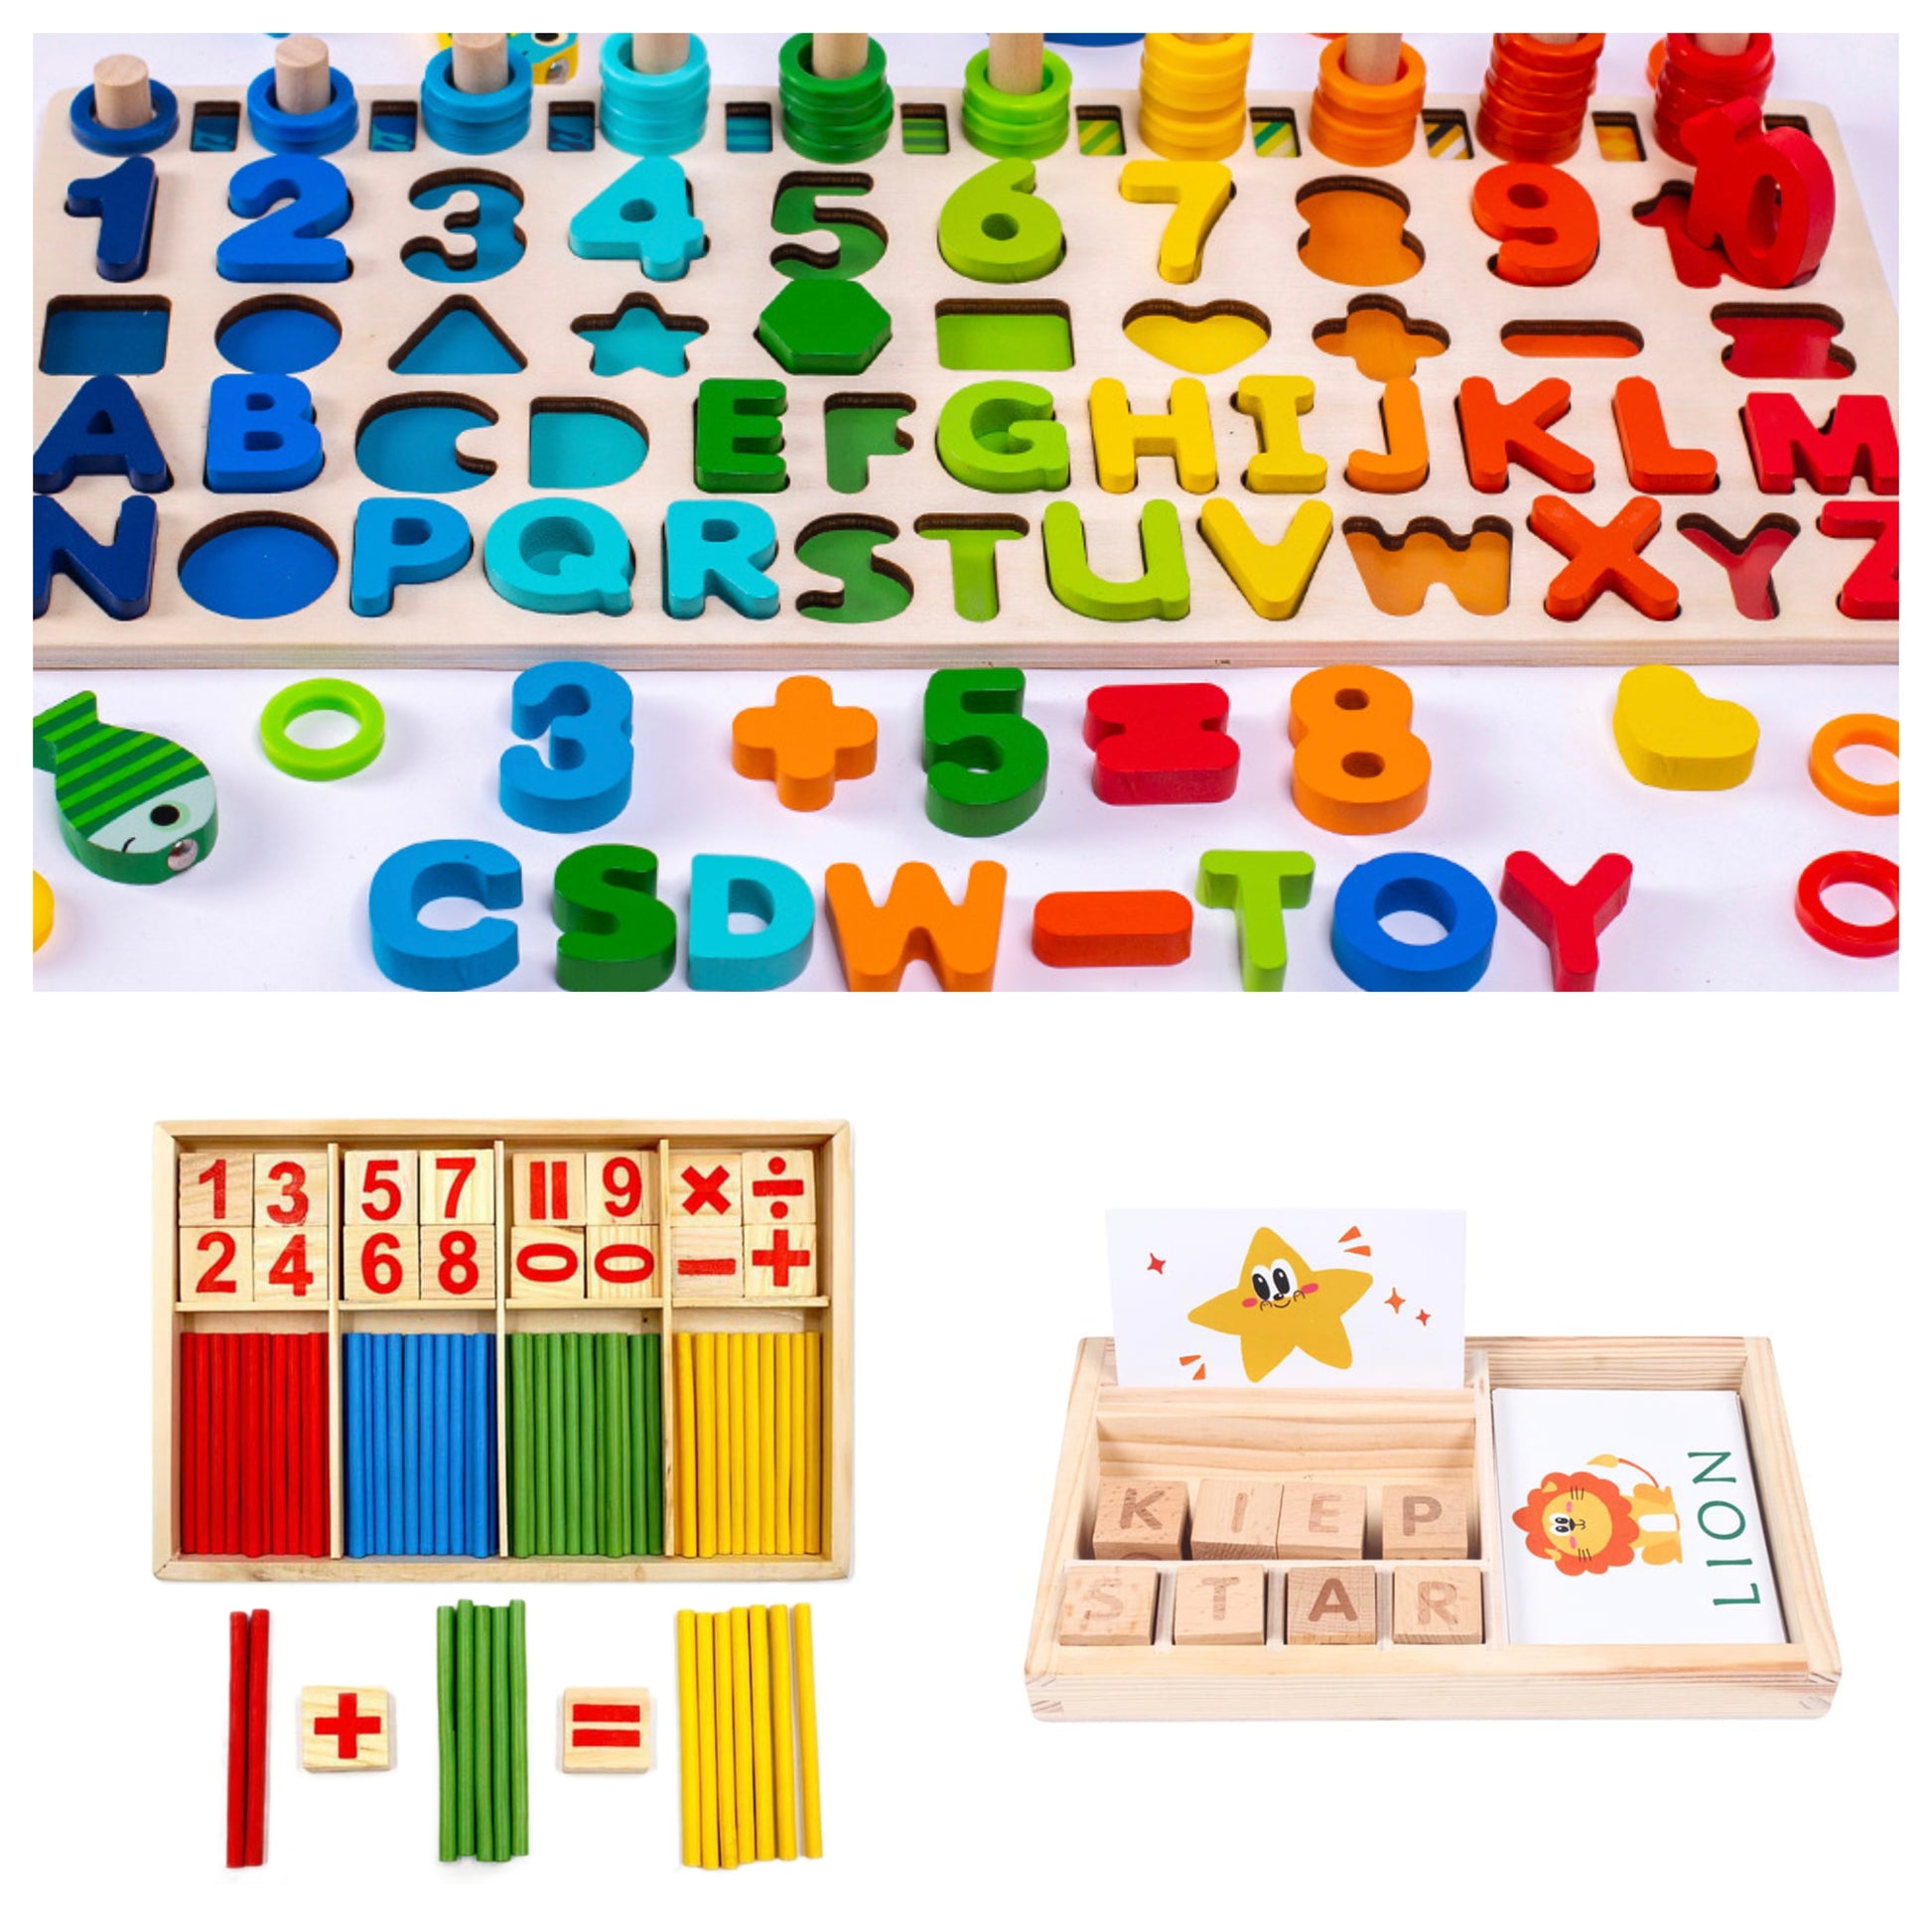 A group of wooden toys for children, including a wooden shapes and numbers puzzle, wooden counting toy and wooden spelling toy.